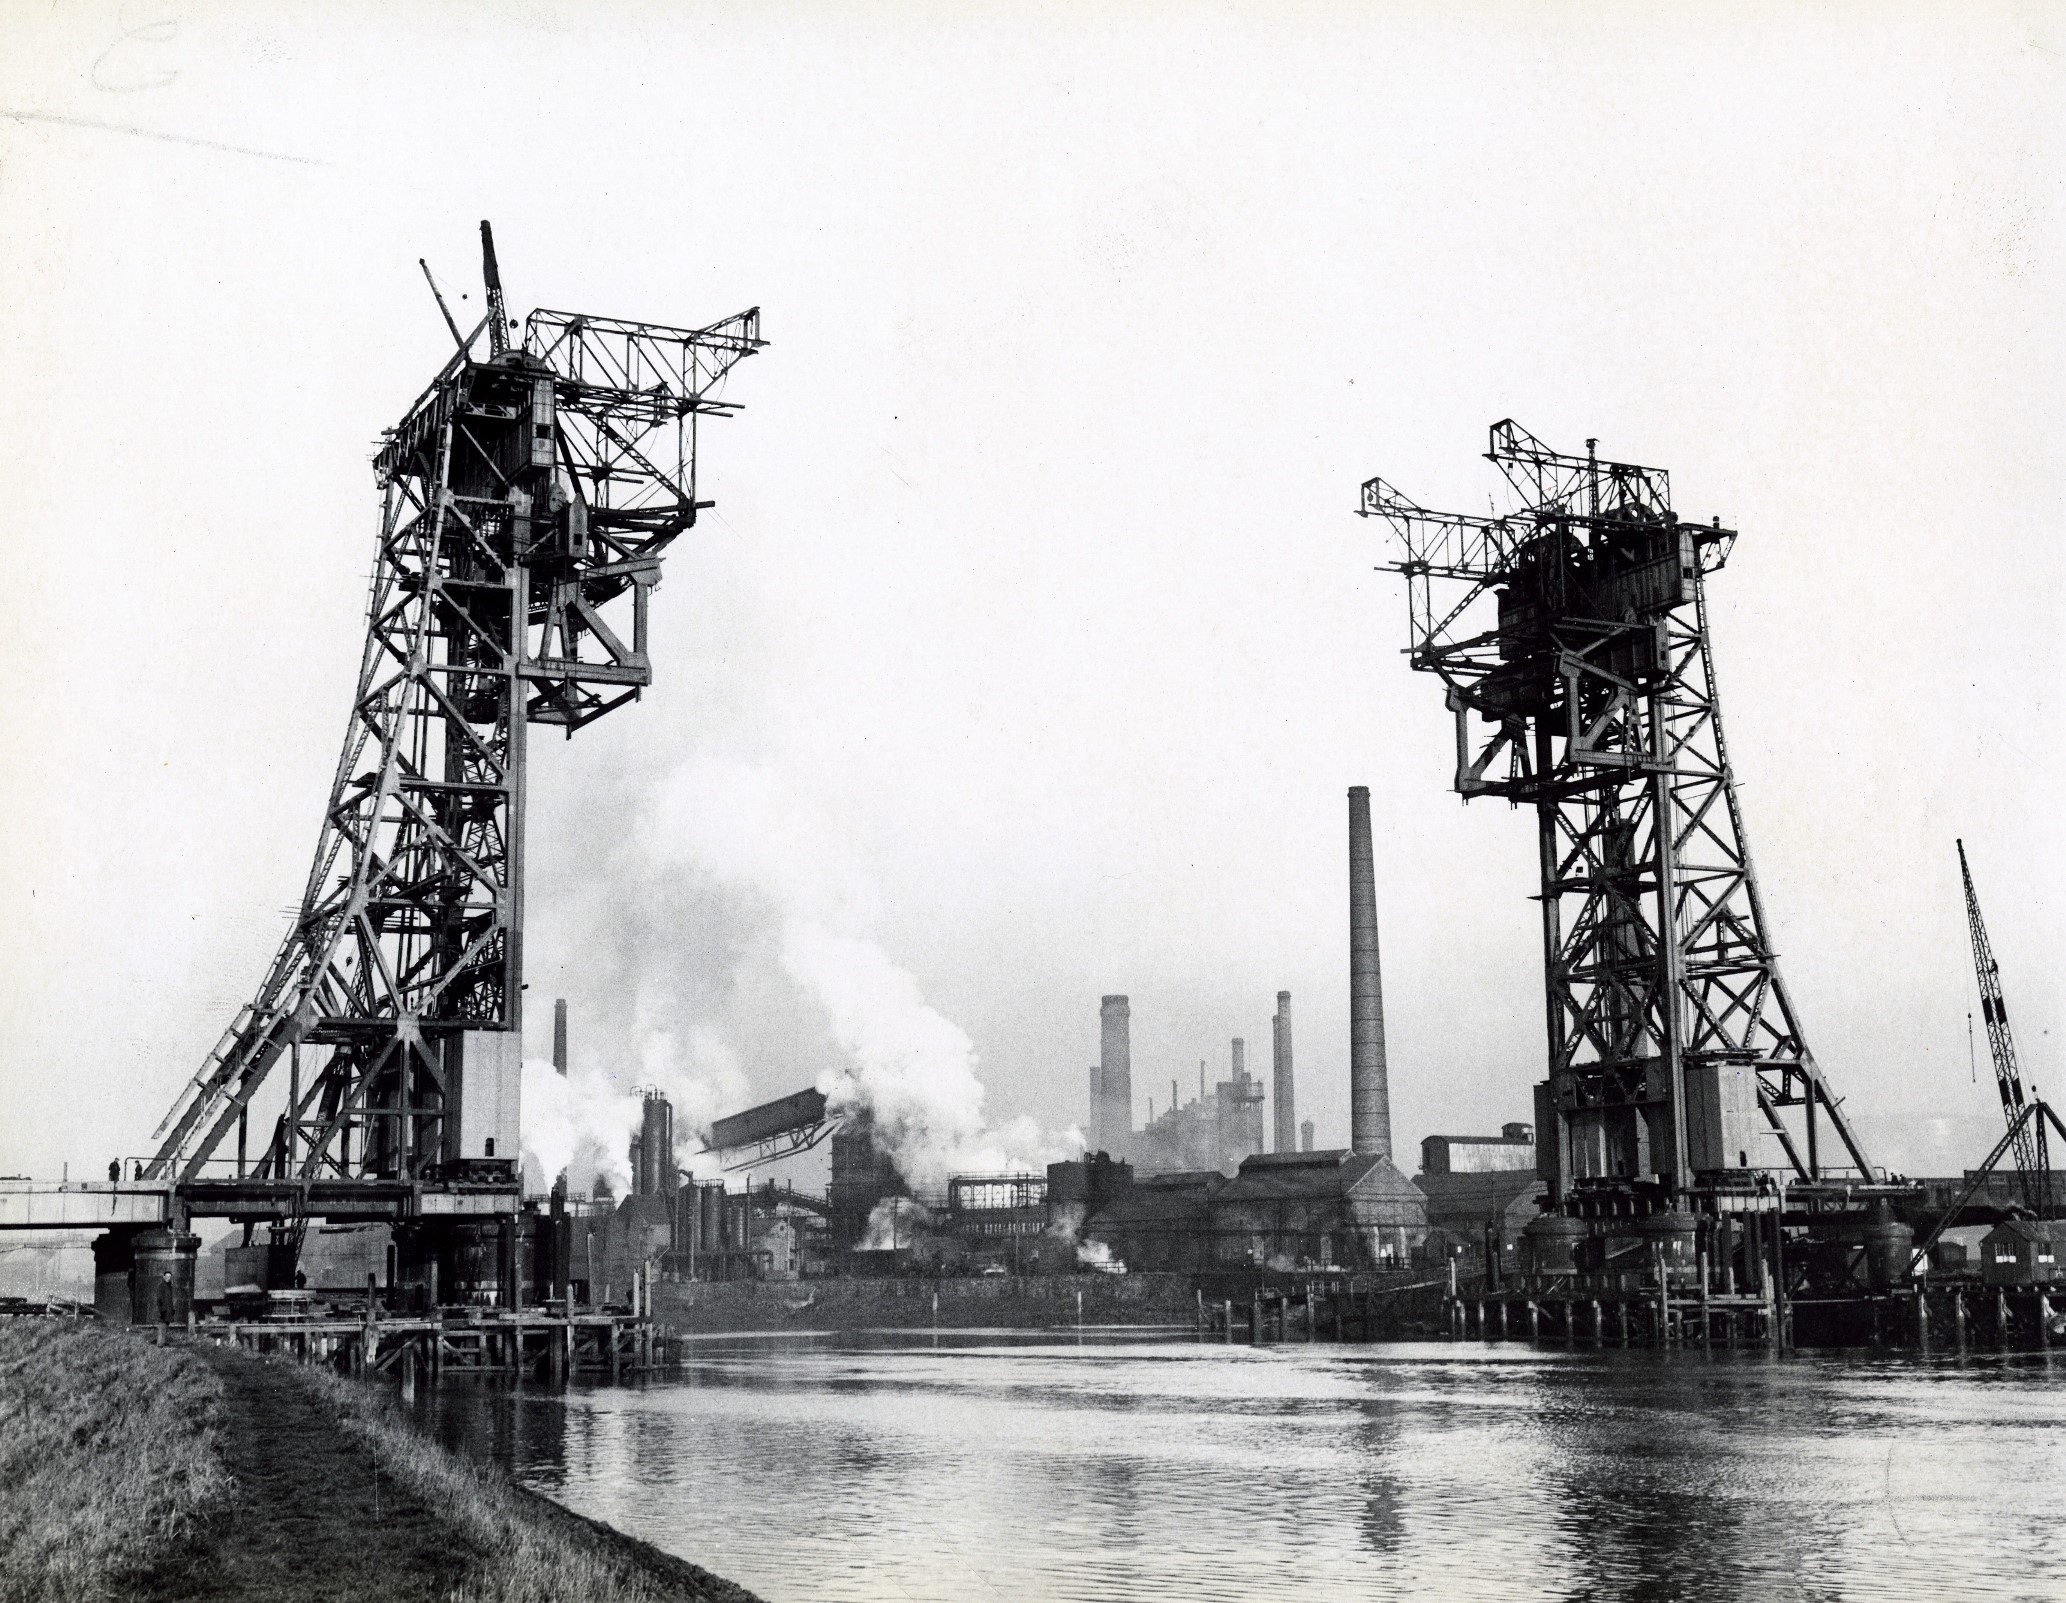 13. Tees Newport Bridge - The first vertical lift bridge in the country takes shape against a backdrop of industry along the Tees.jpg